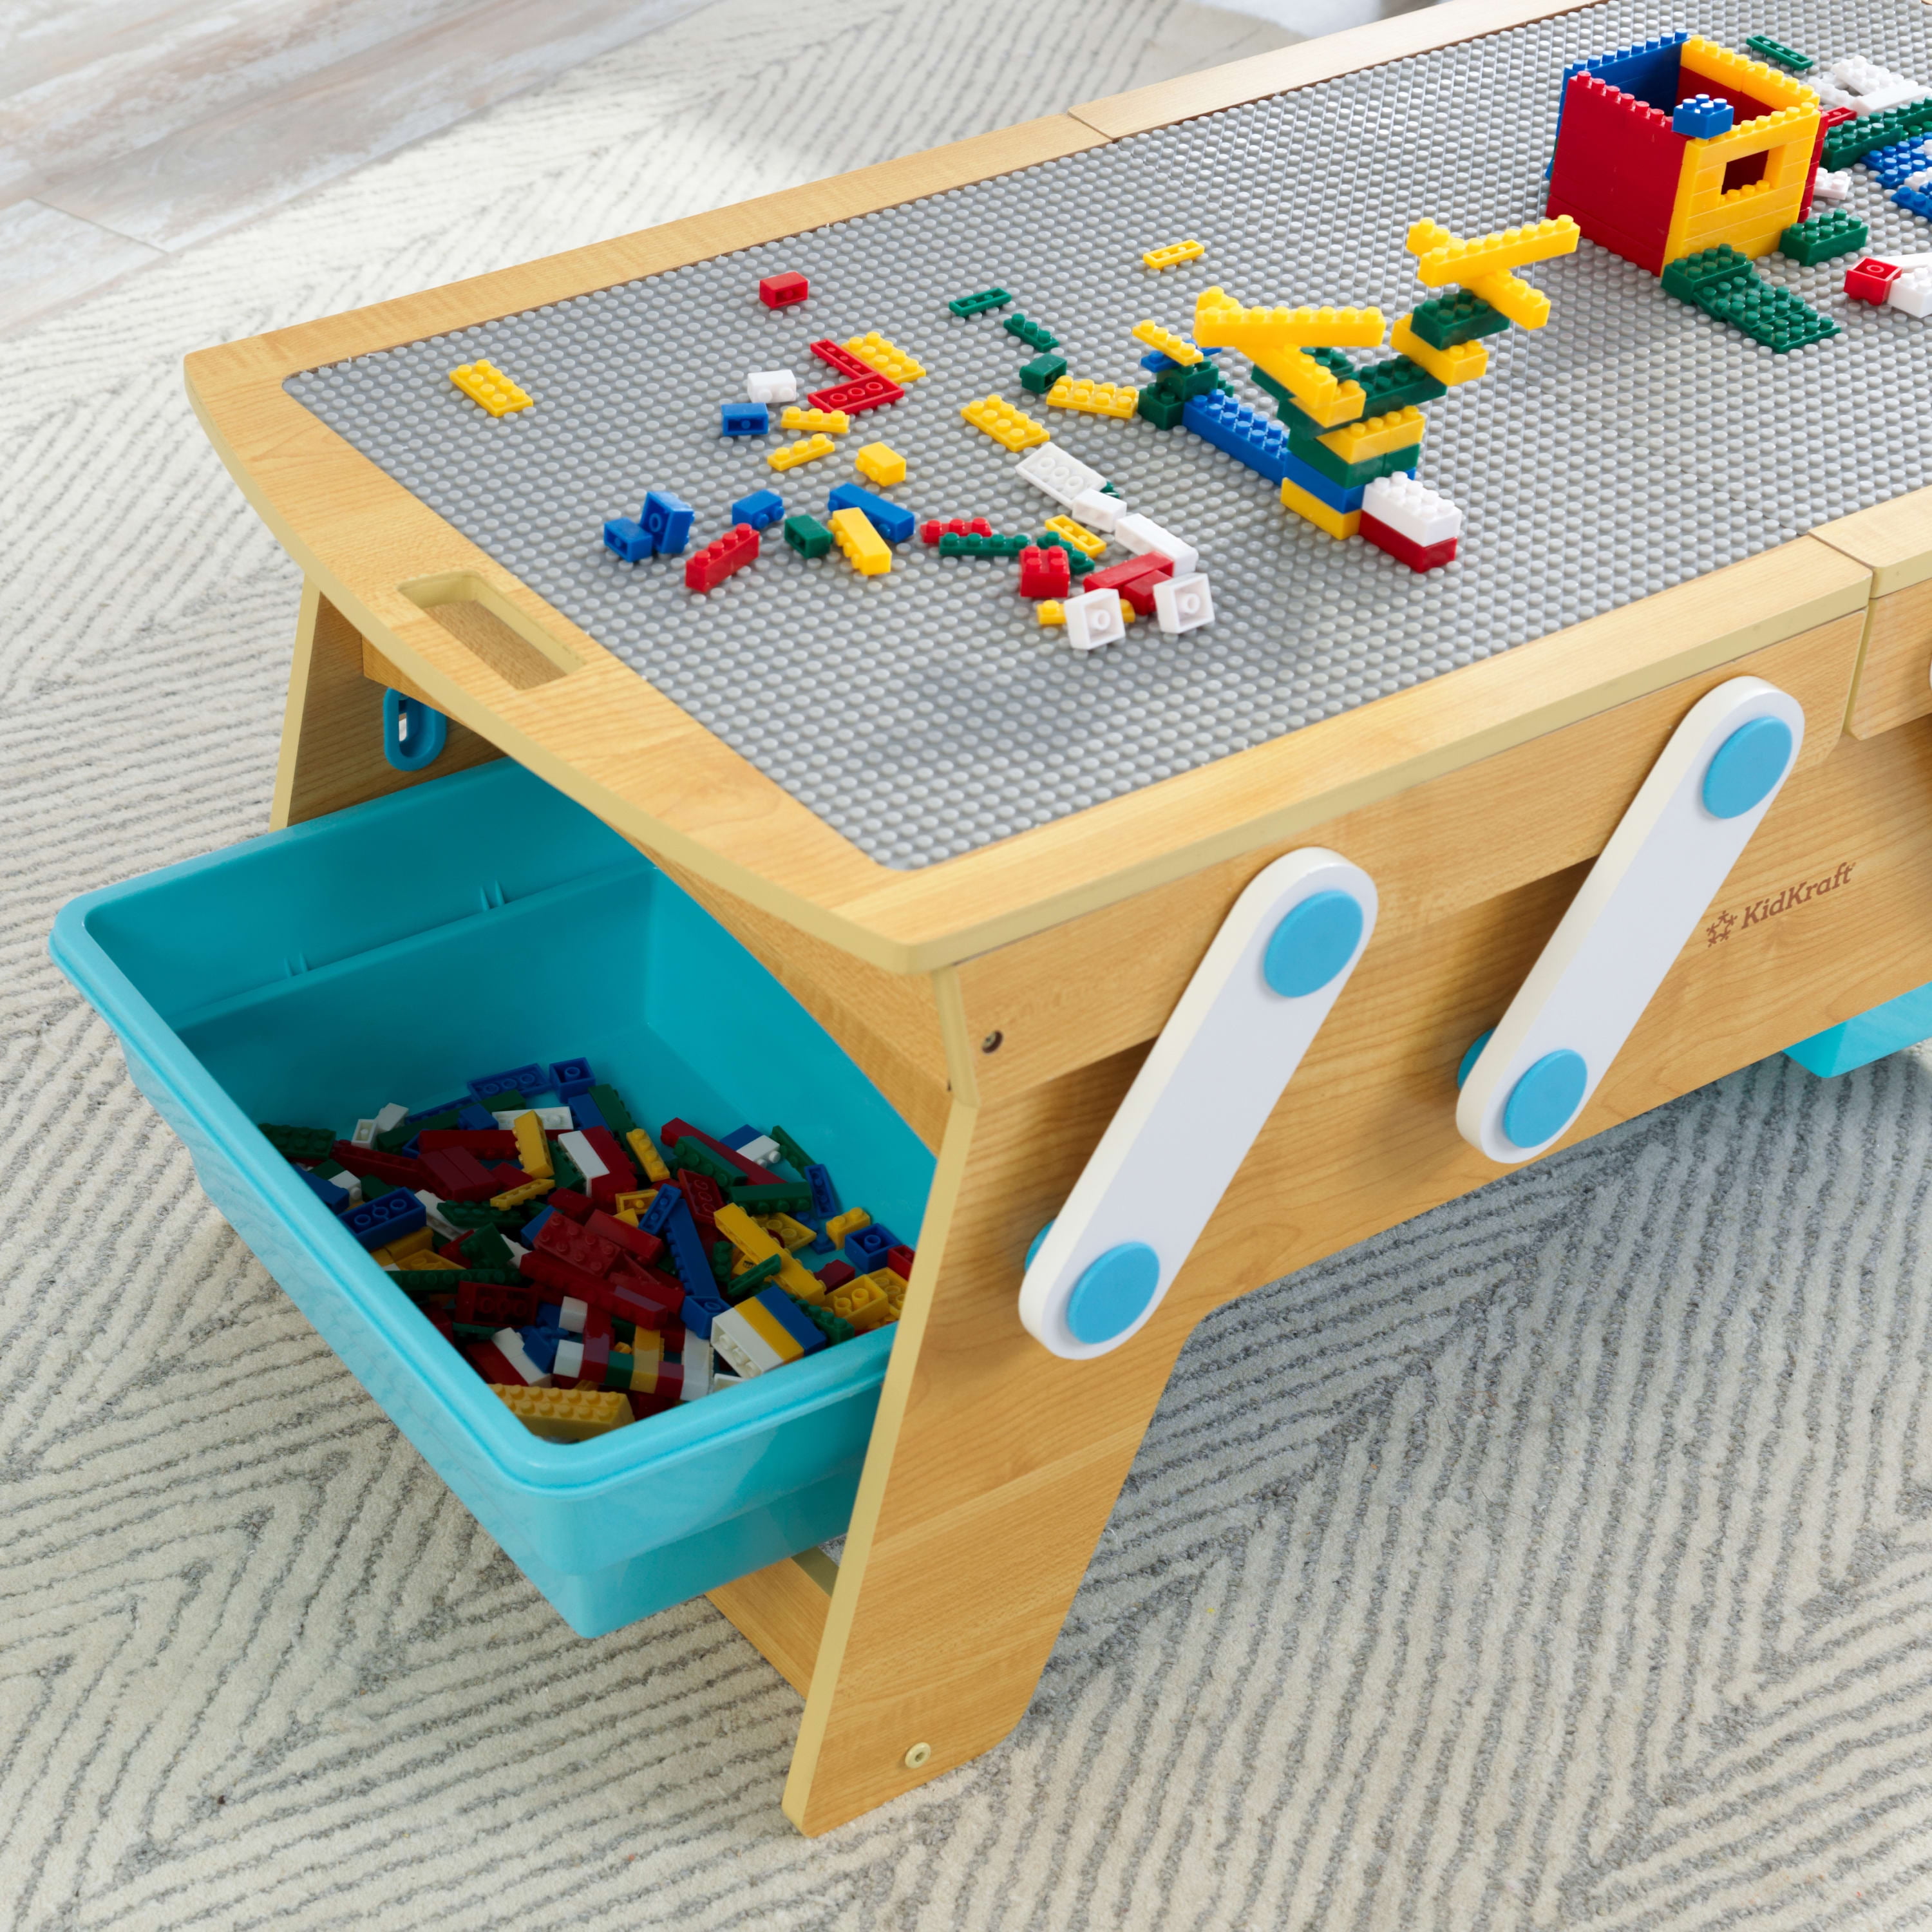 Kids Activity Table With Storage, Building Bricks Table, Playroom